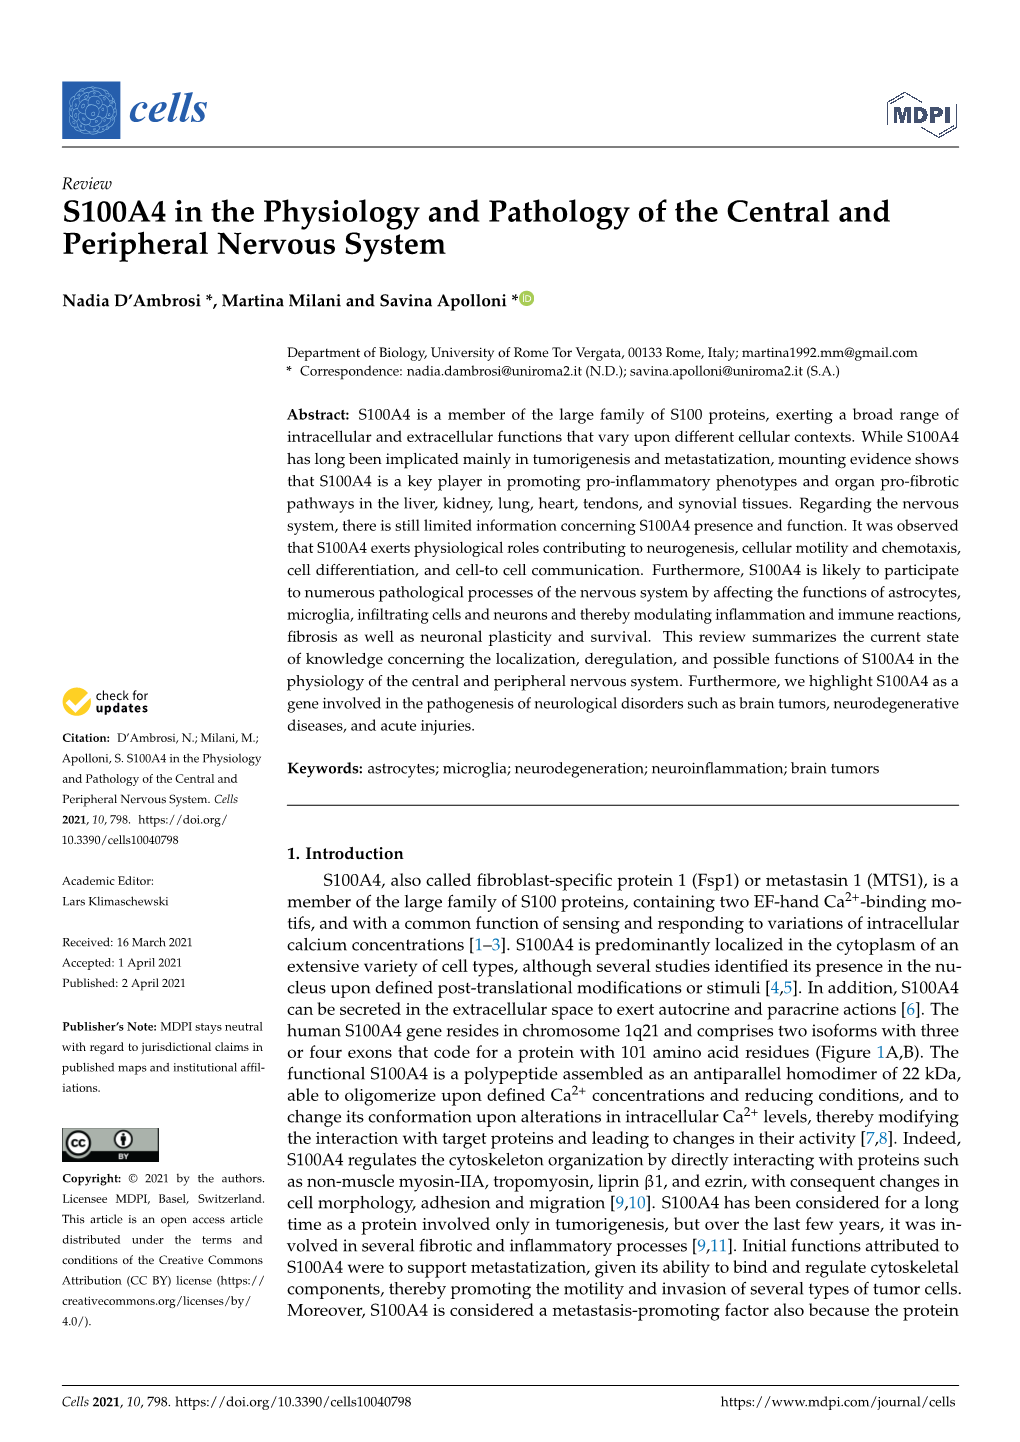 S100A4 in the Physiology and Pathology of the Central and Peripheral Nervous System